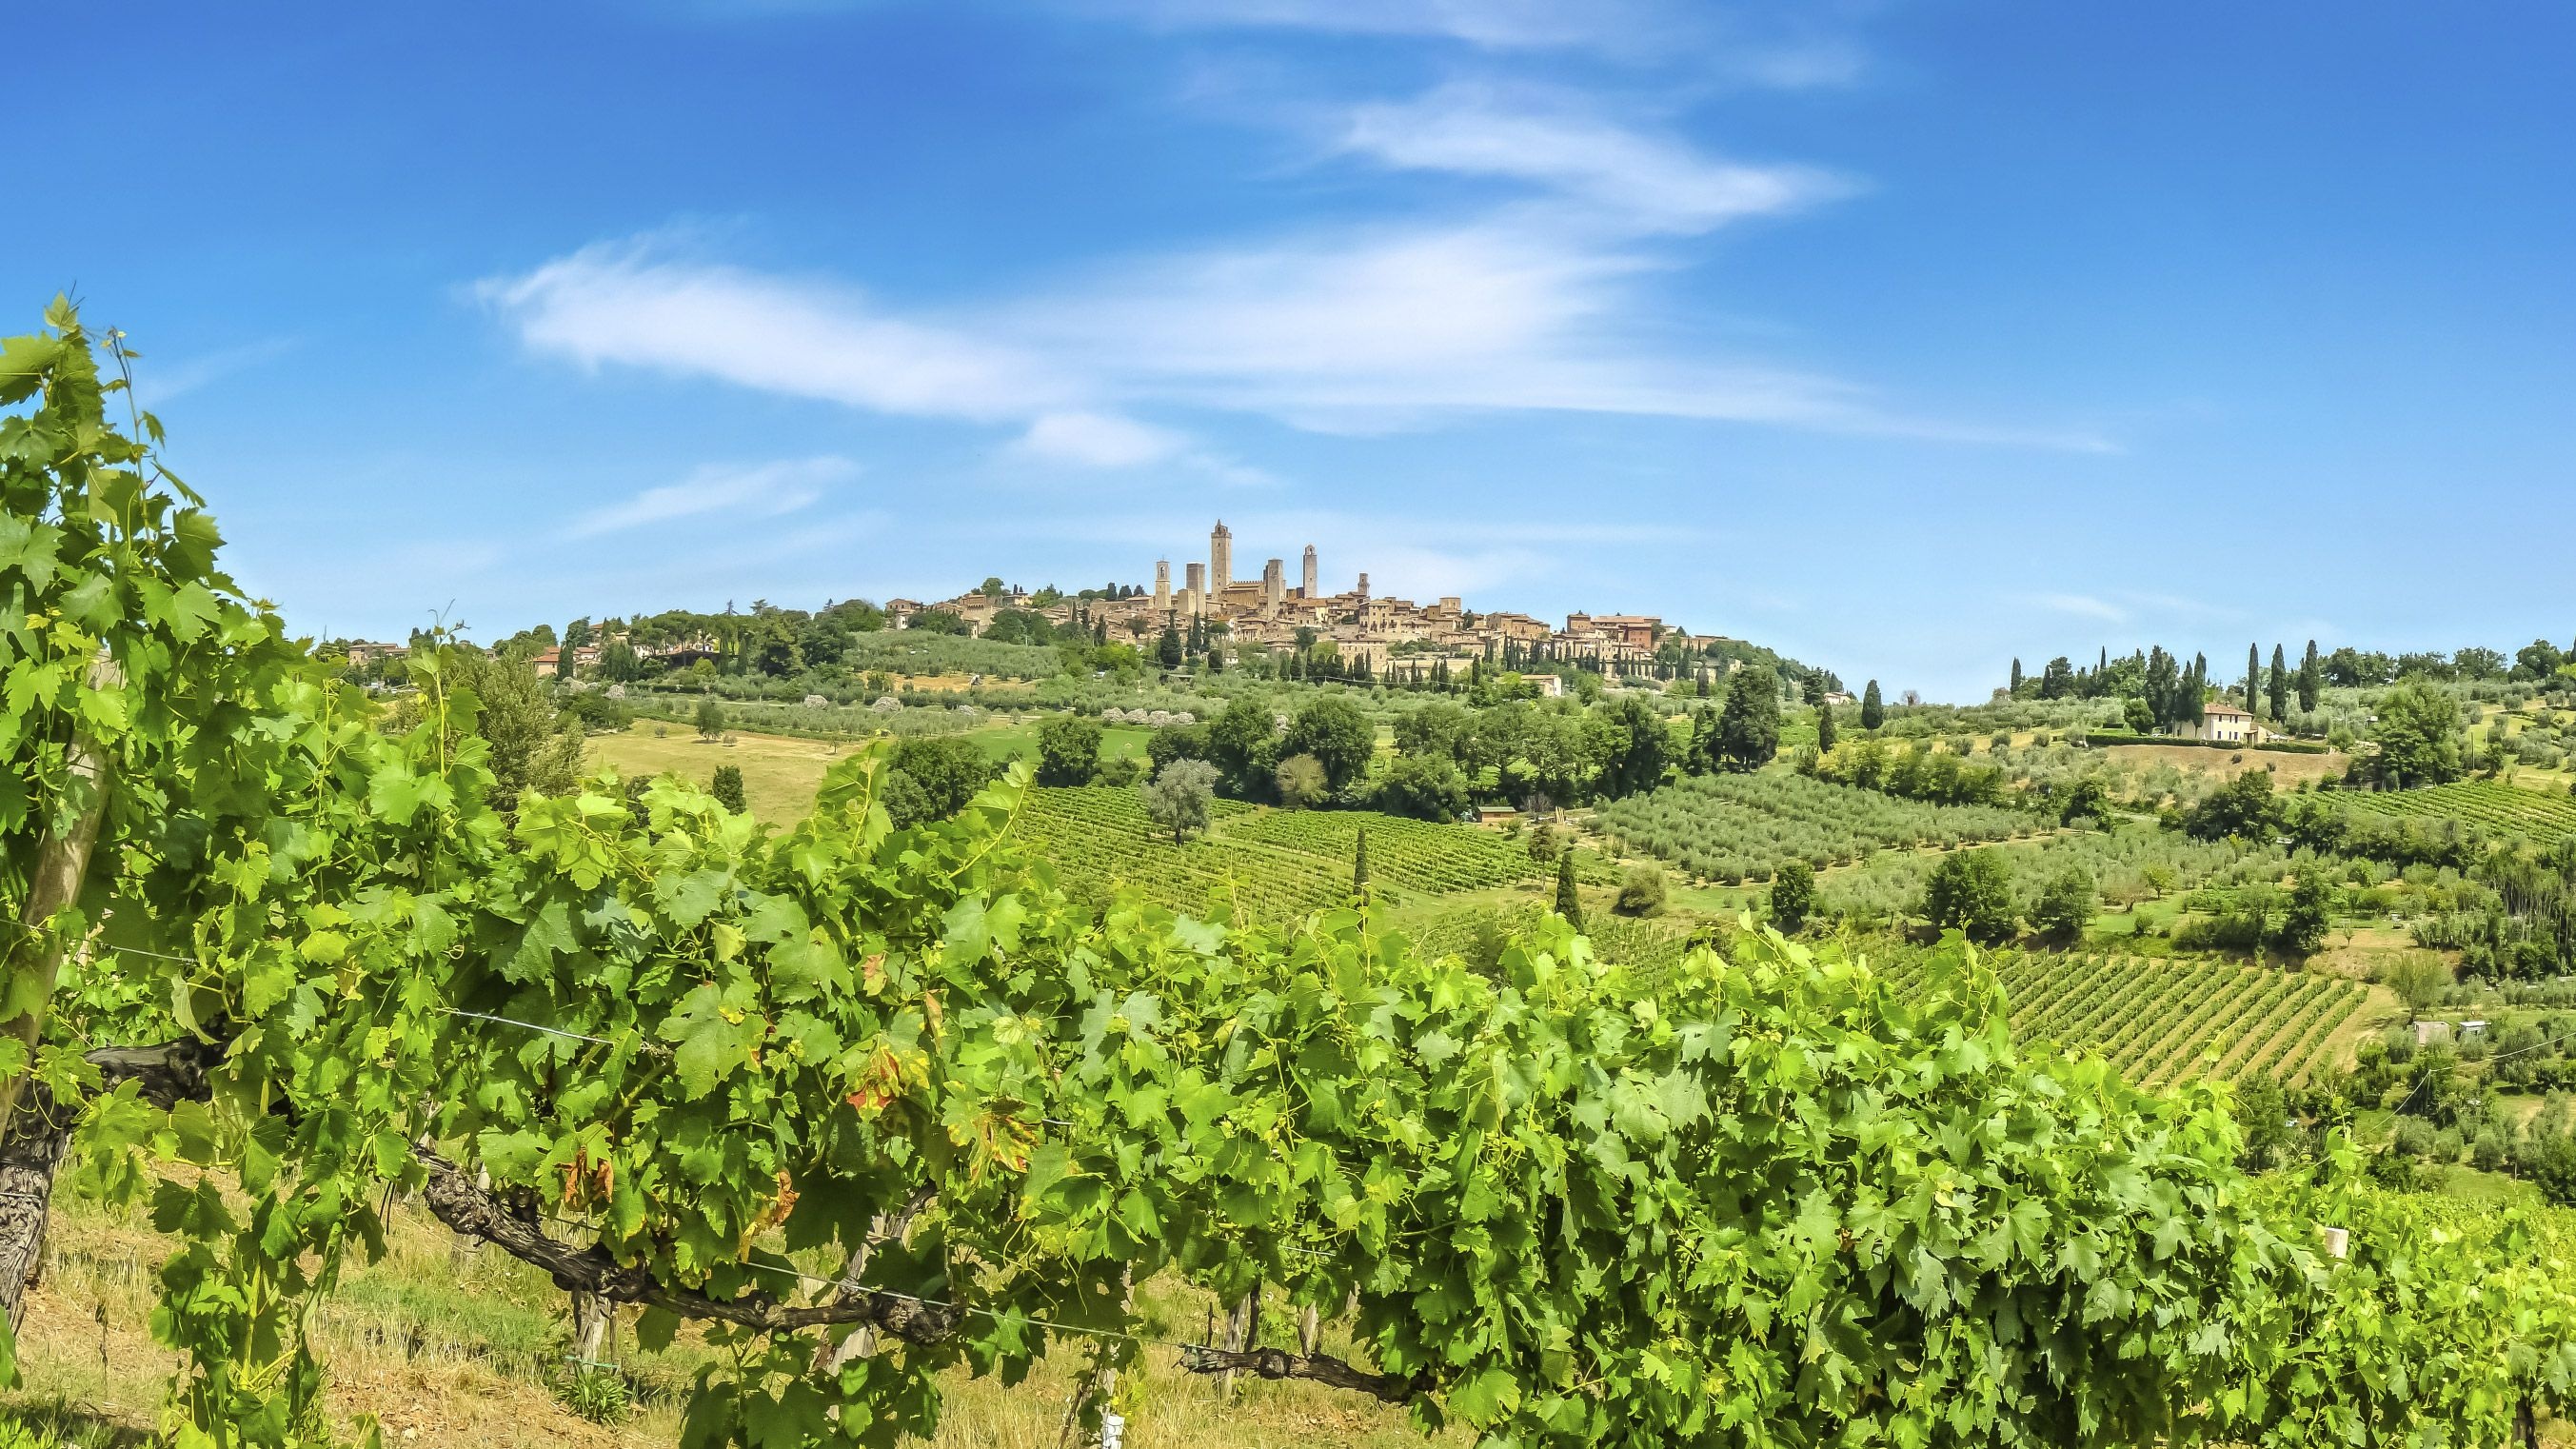 Holiday in San Gimignano, Tuscan escape, Relaxing vacation, Charming town, 2710x1530 HD Desktop